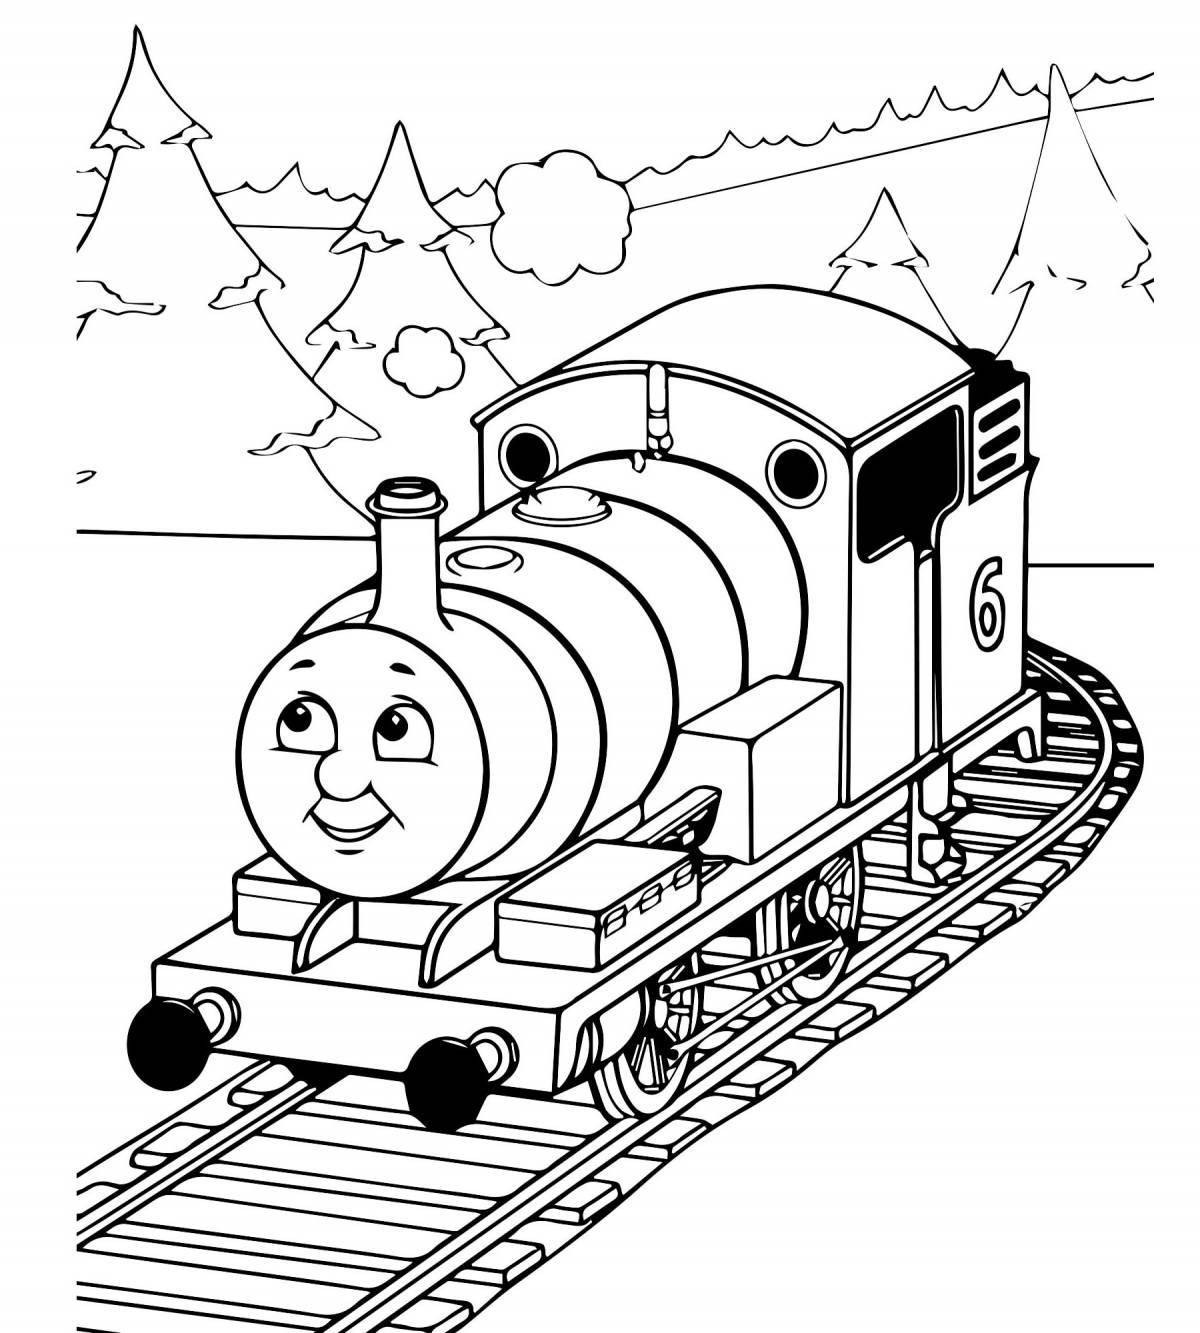 Thomas the Tank Engine Creative Coloring for Kids